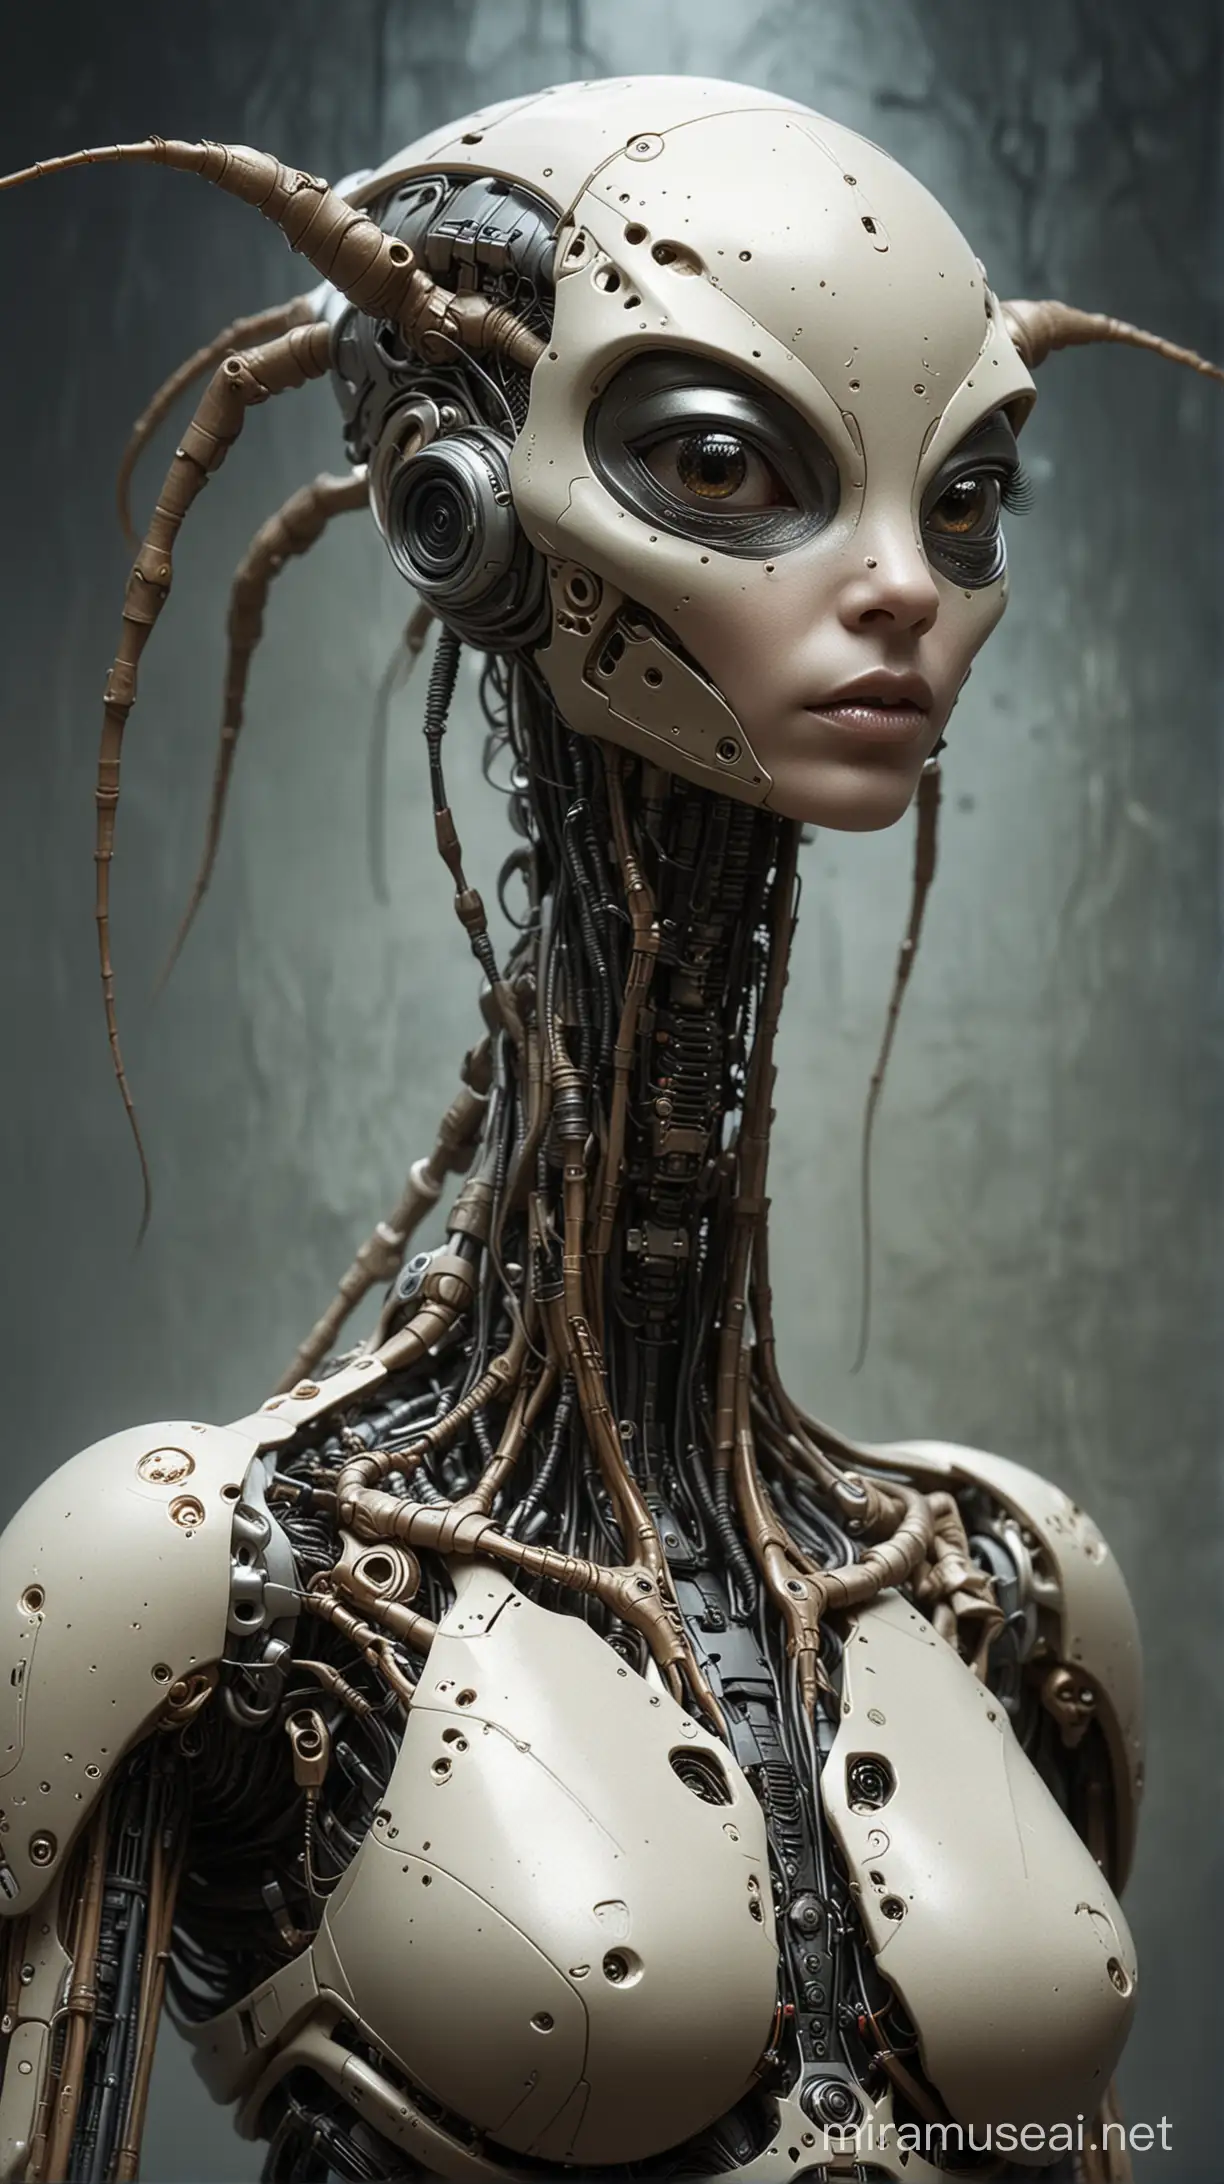 Cyborg Ant in Futuristic Fashion Inspired by Peter Gric Art